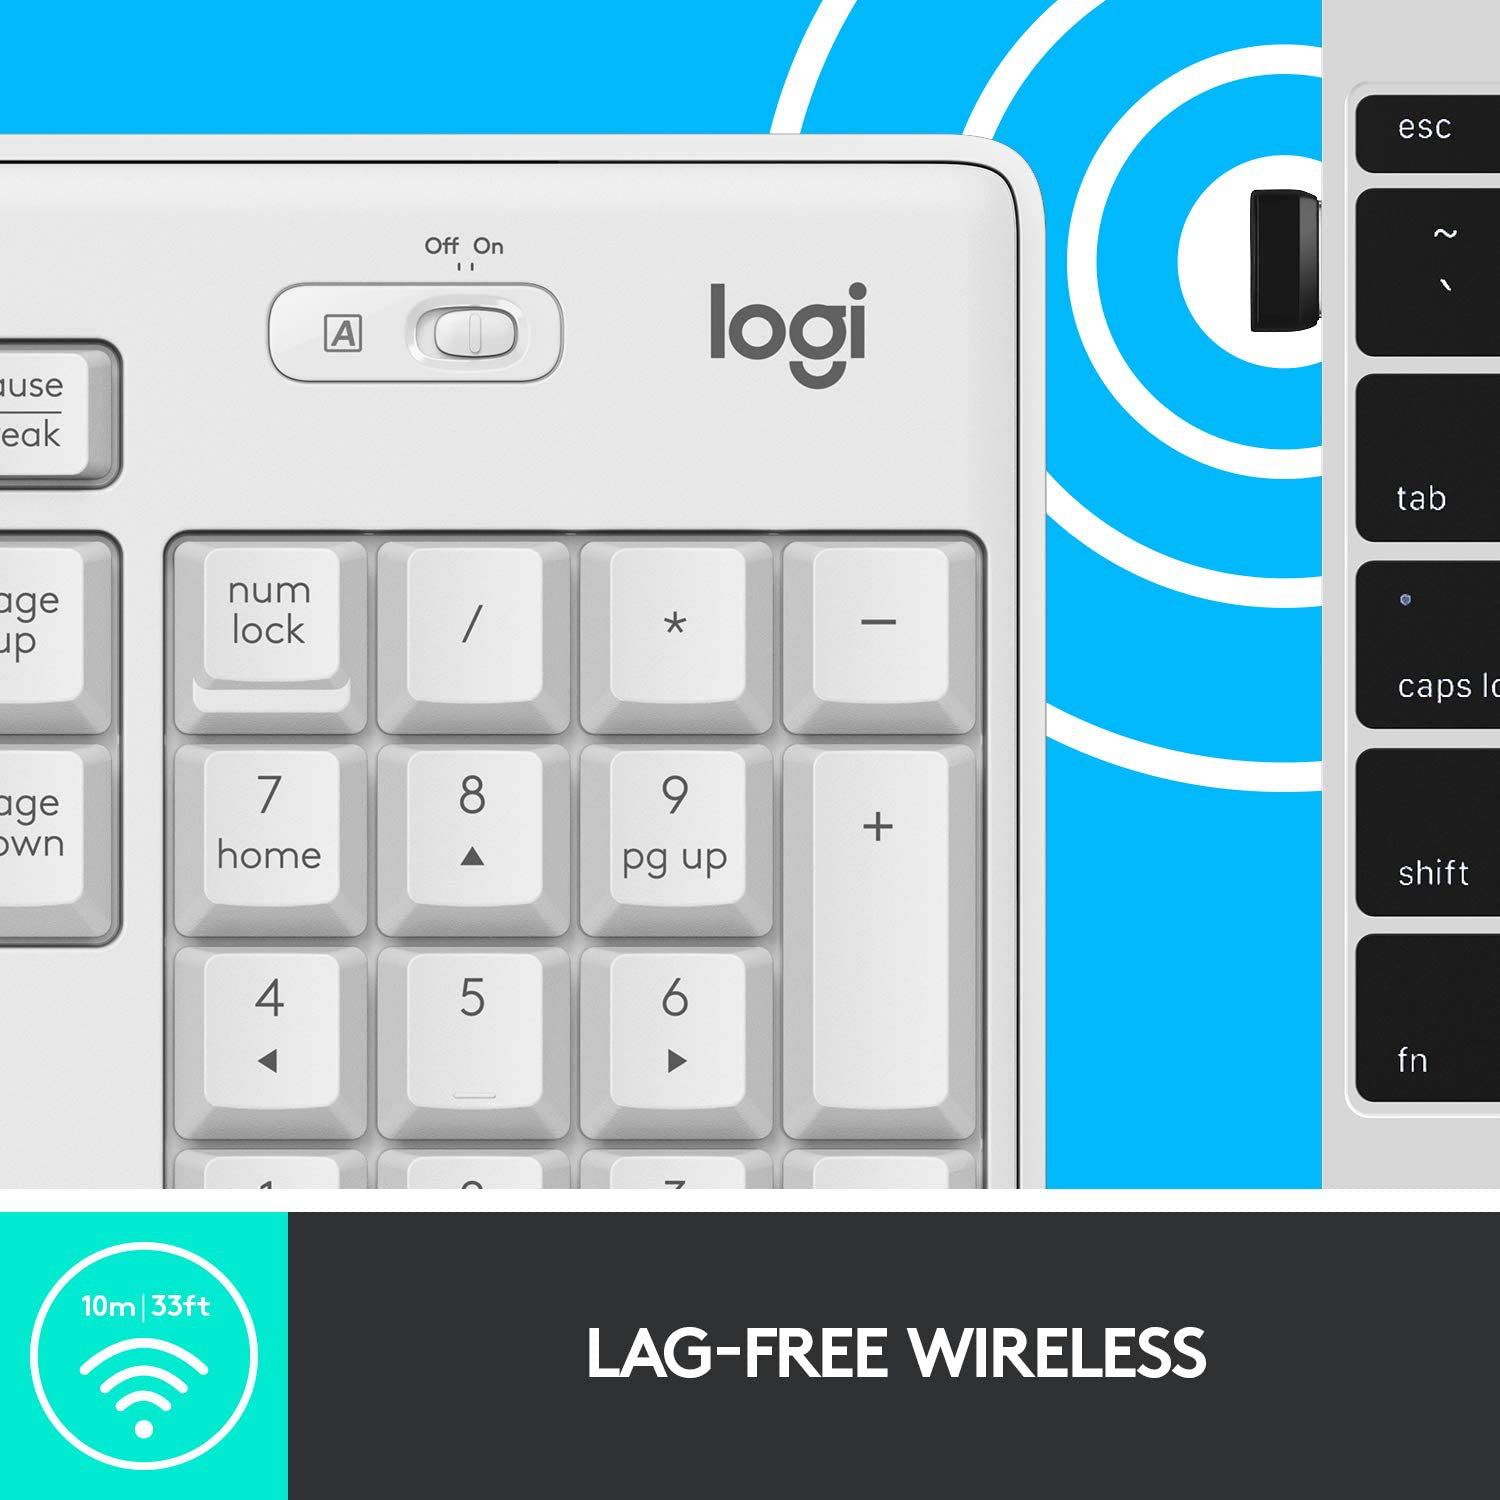 Logitech MK295 Wireless Mouse & Keyboard Combo with Silenttouch Technology, Full Numpad, Advanced Optical Tracking, Lag-Free Wireless, 90% Less Noise - off White